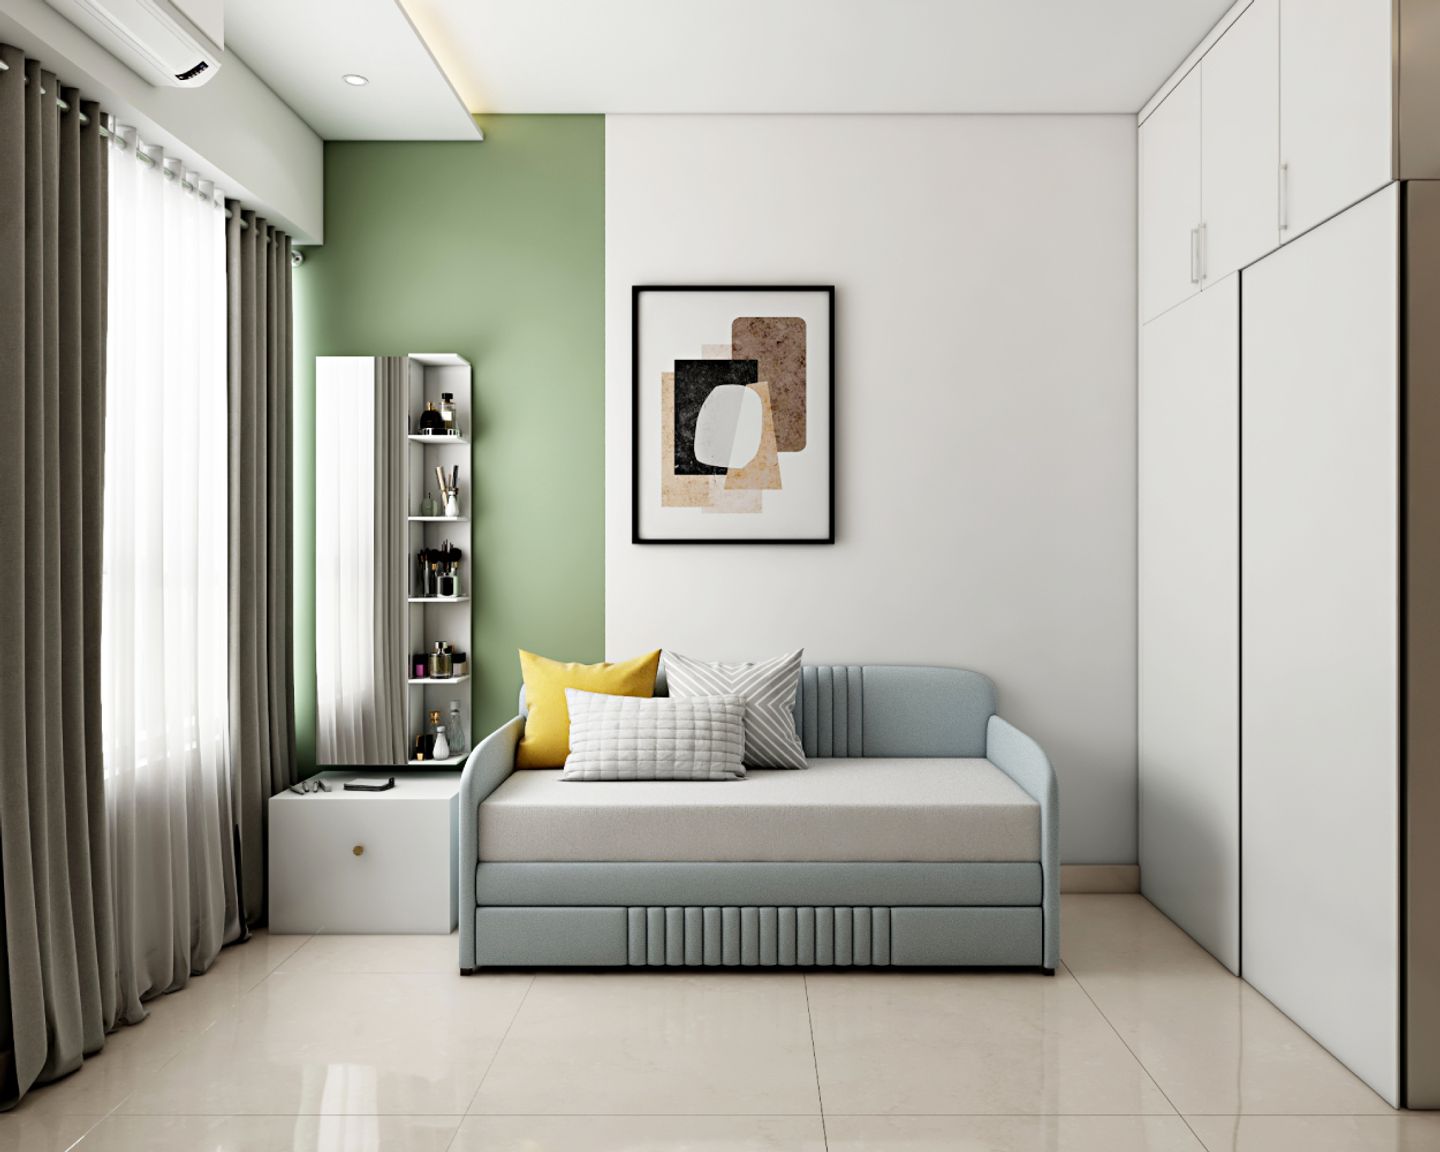 Spacious Guest Bedroom Design With Grey-White Sofa-Cum-Bed, 2-Door White Sliding Wardrobe With Loft Storage, White Dressing Table Unit And Dual-Toned Green And White Wall - Livspace